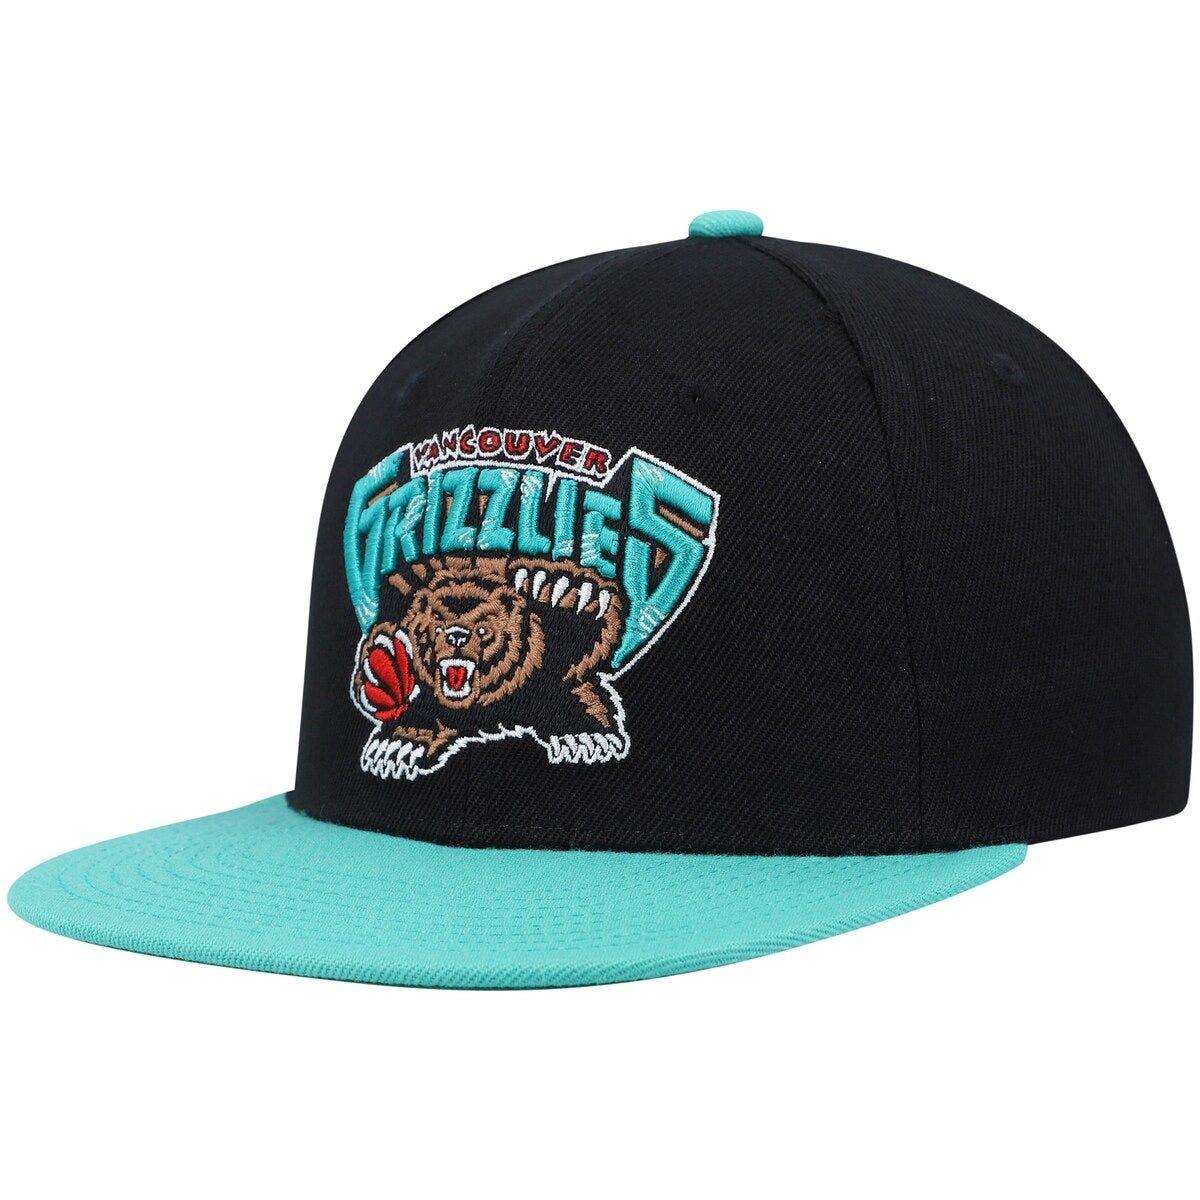 Mitchell & Ness Red/Black Vancouver Grizzlies Hardwood Classics Snapback Hat